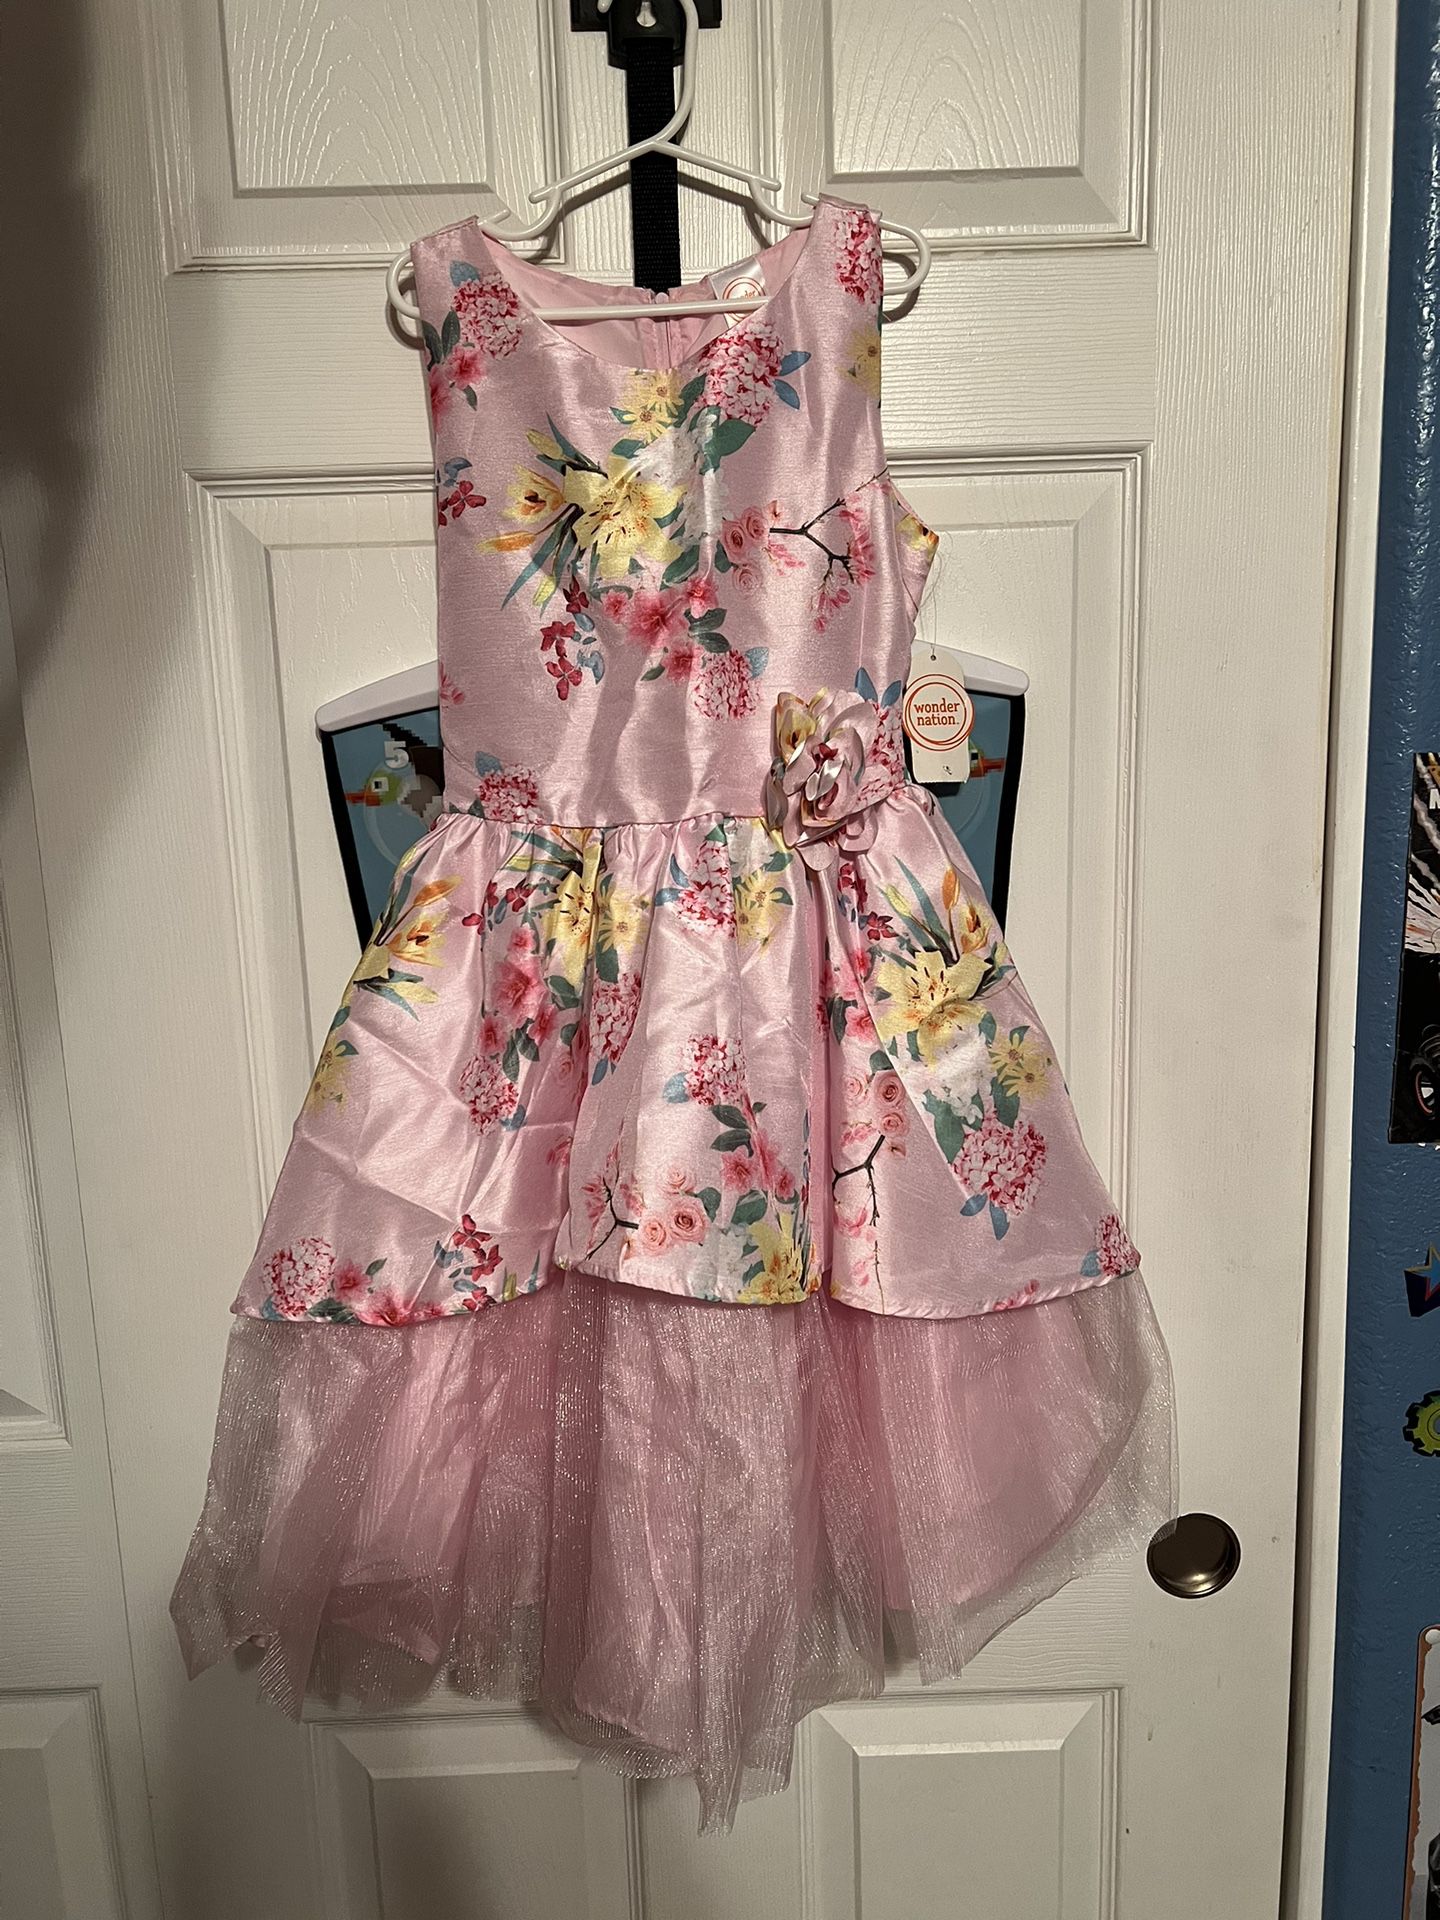 Girls Size 8-10 Dress (104th Ave & Olive)